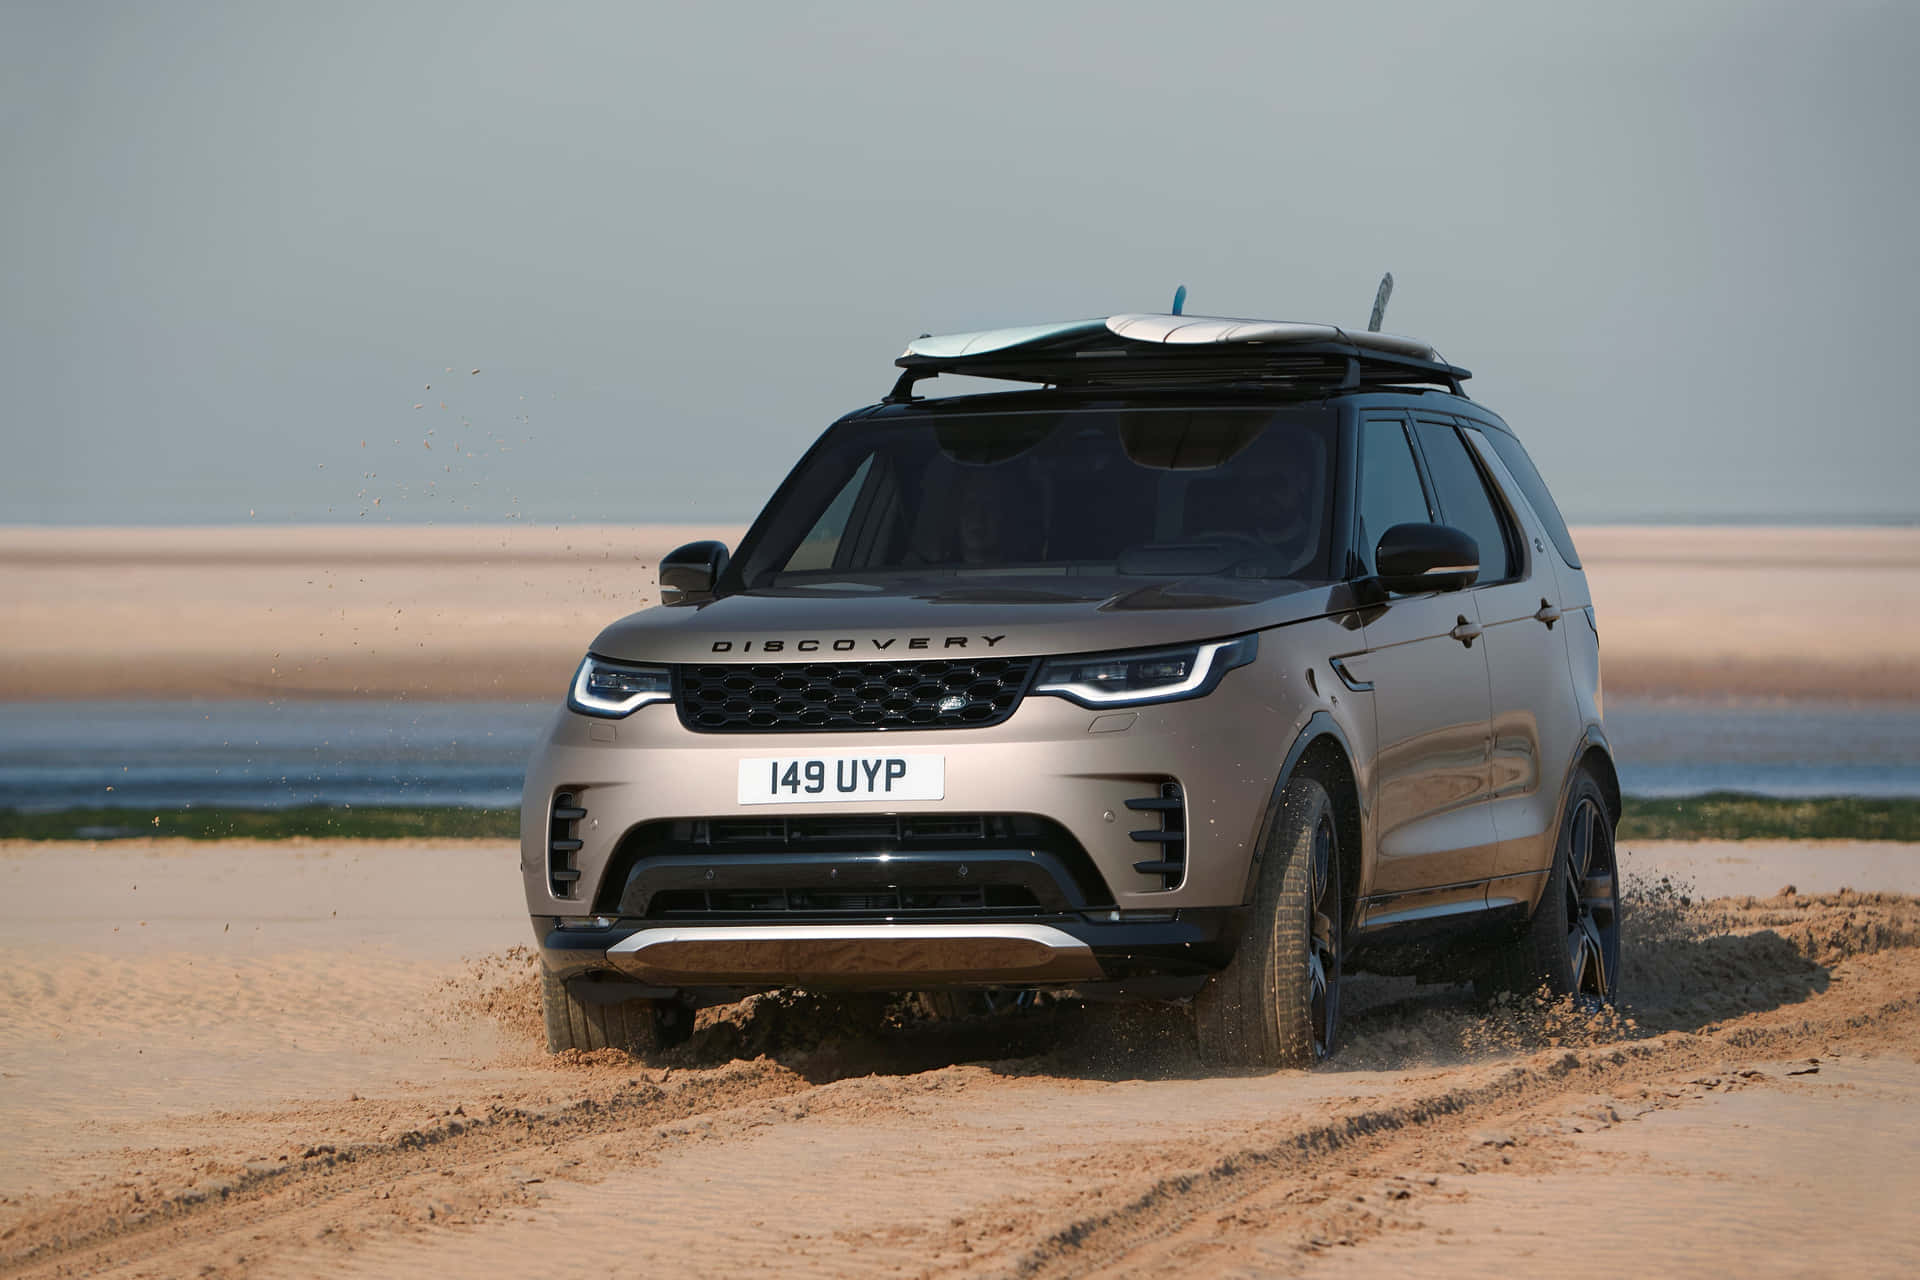 Land Rover Discovery gliding through a breathtaking landscape Wallpaper